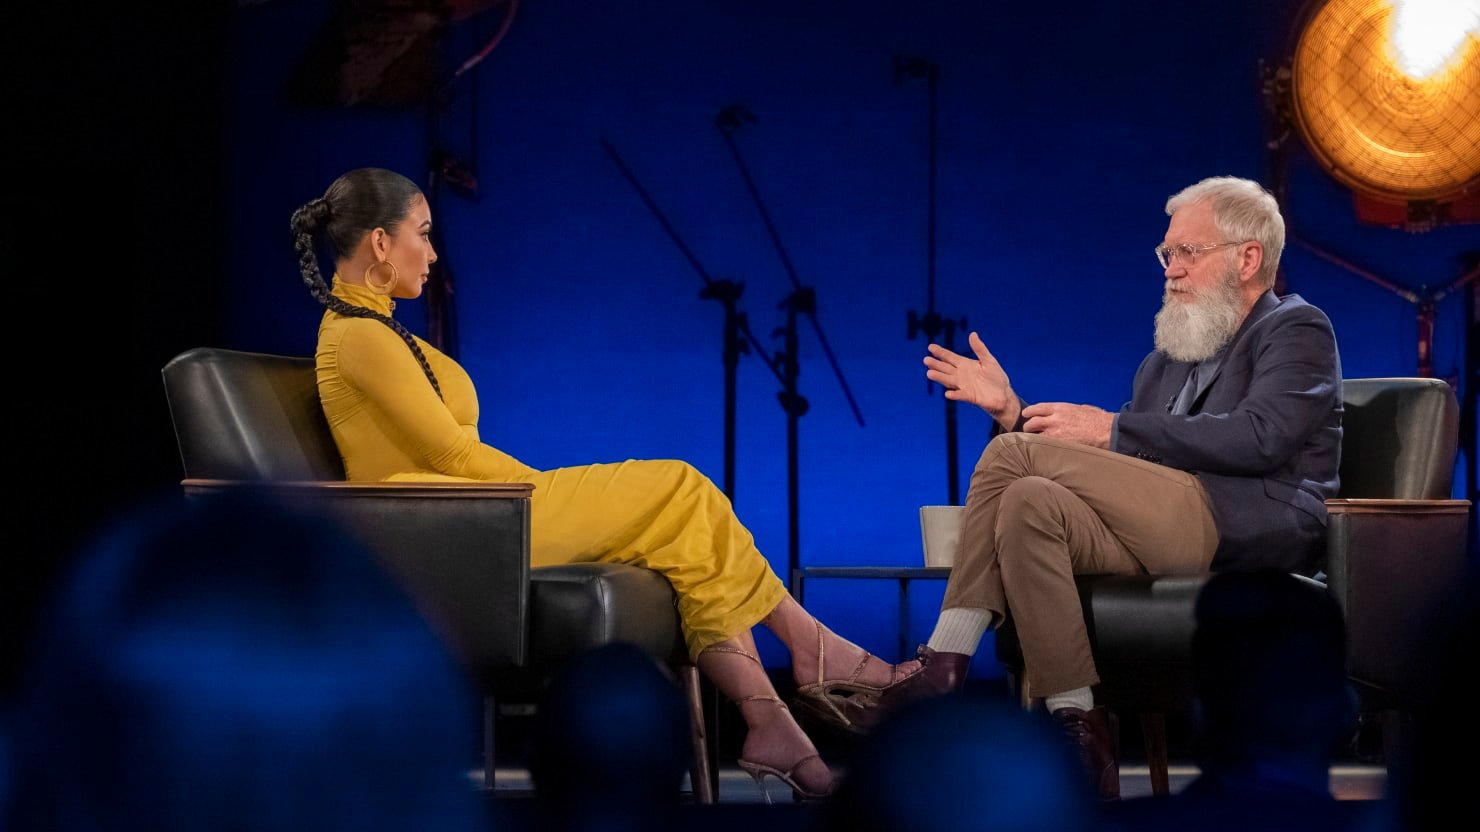 David Letterman confronts Kim Kardashian West over working with Trump